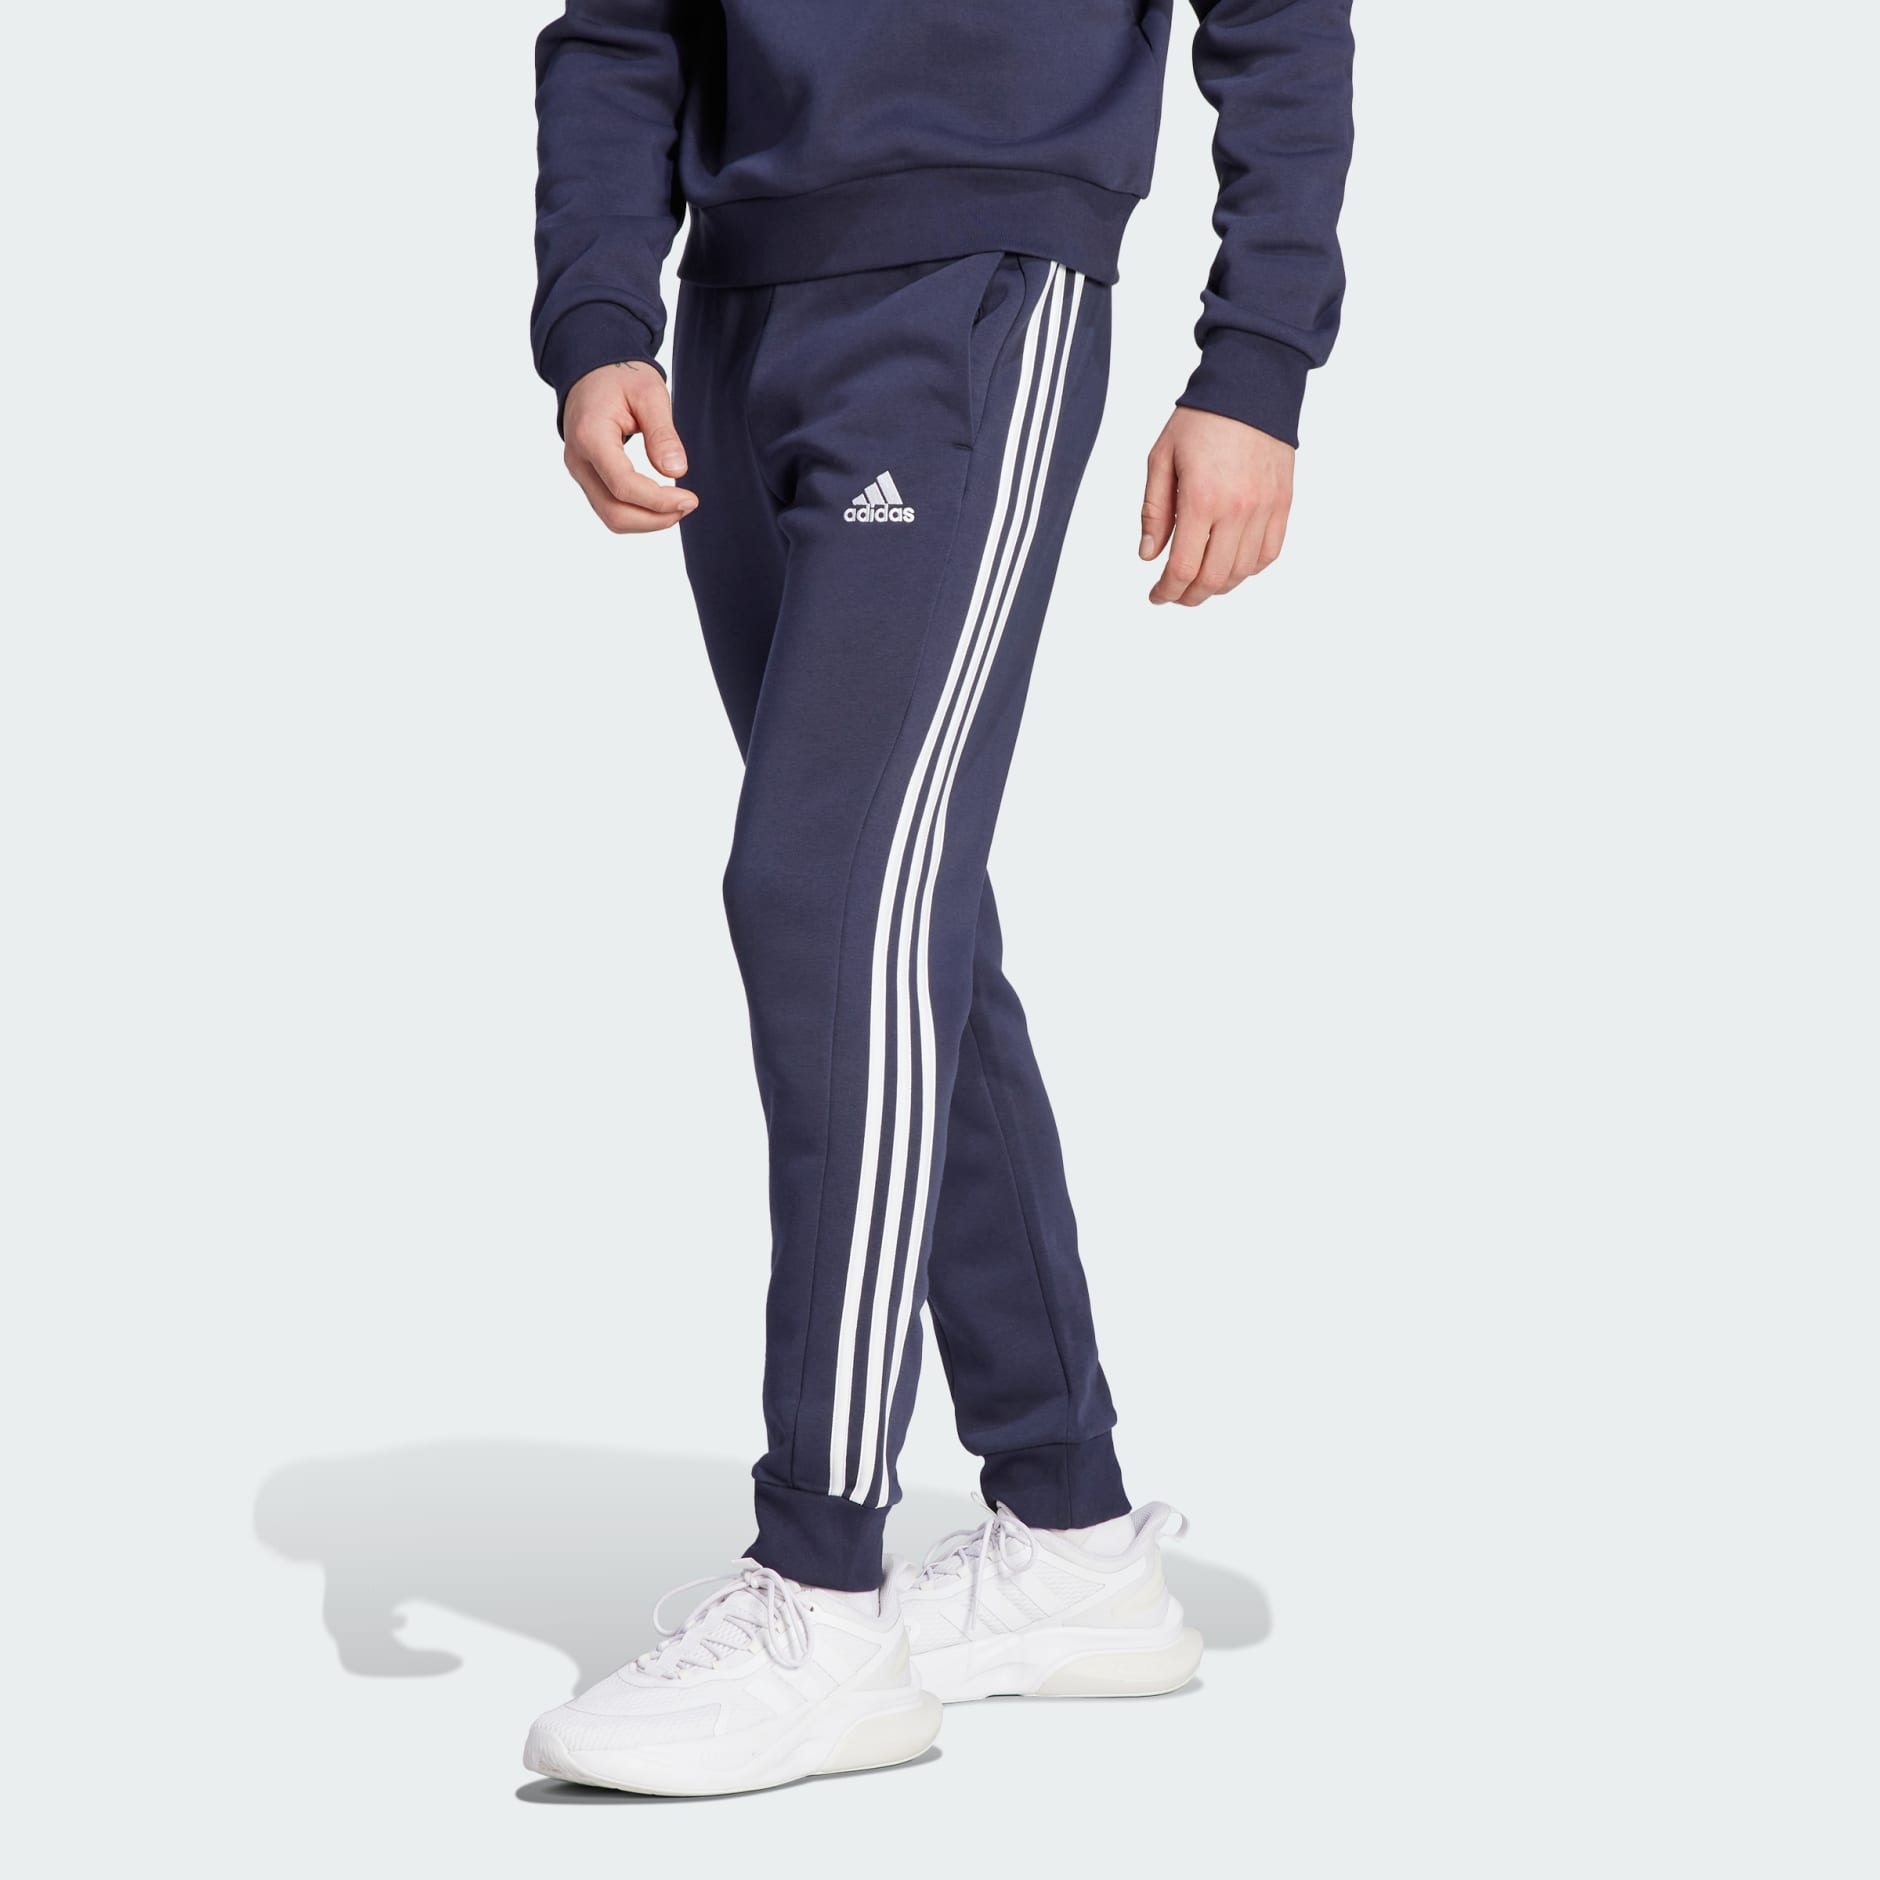 Men's Clothing - Essentials Fleece 3-Stripes Tapered Cuff Pants - Blue